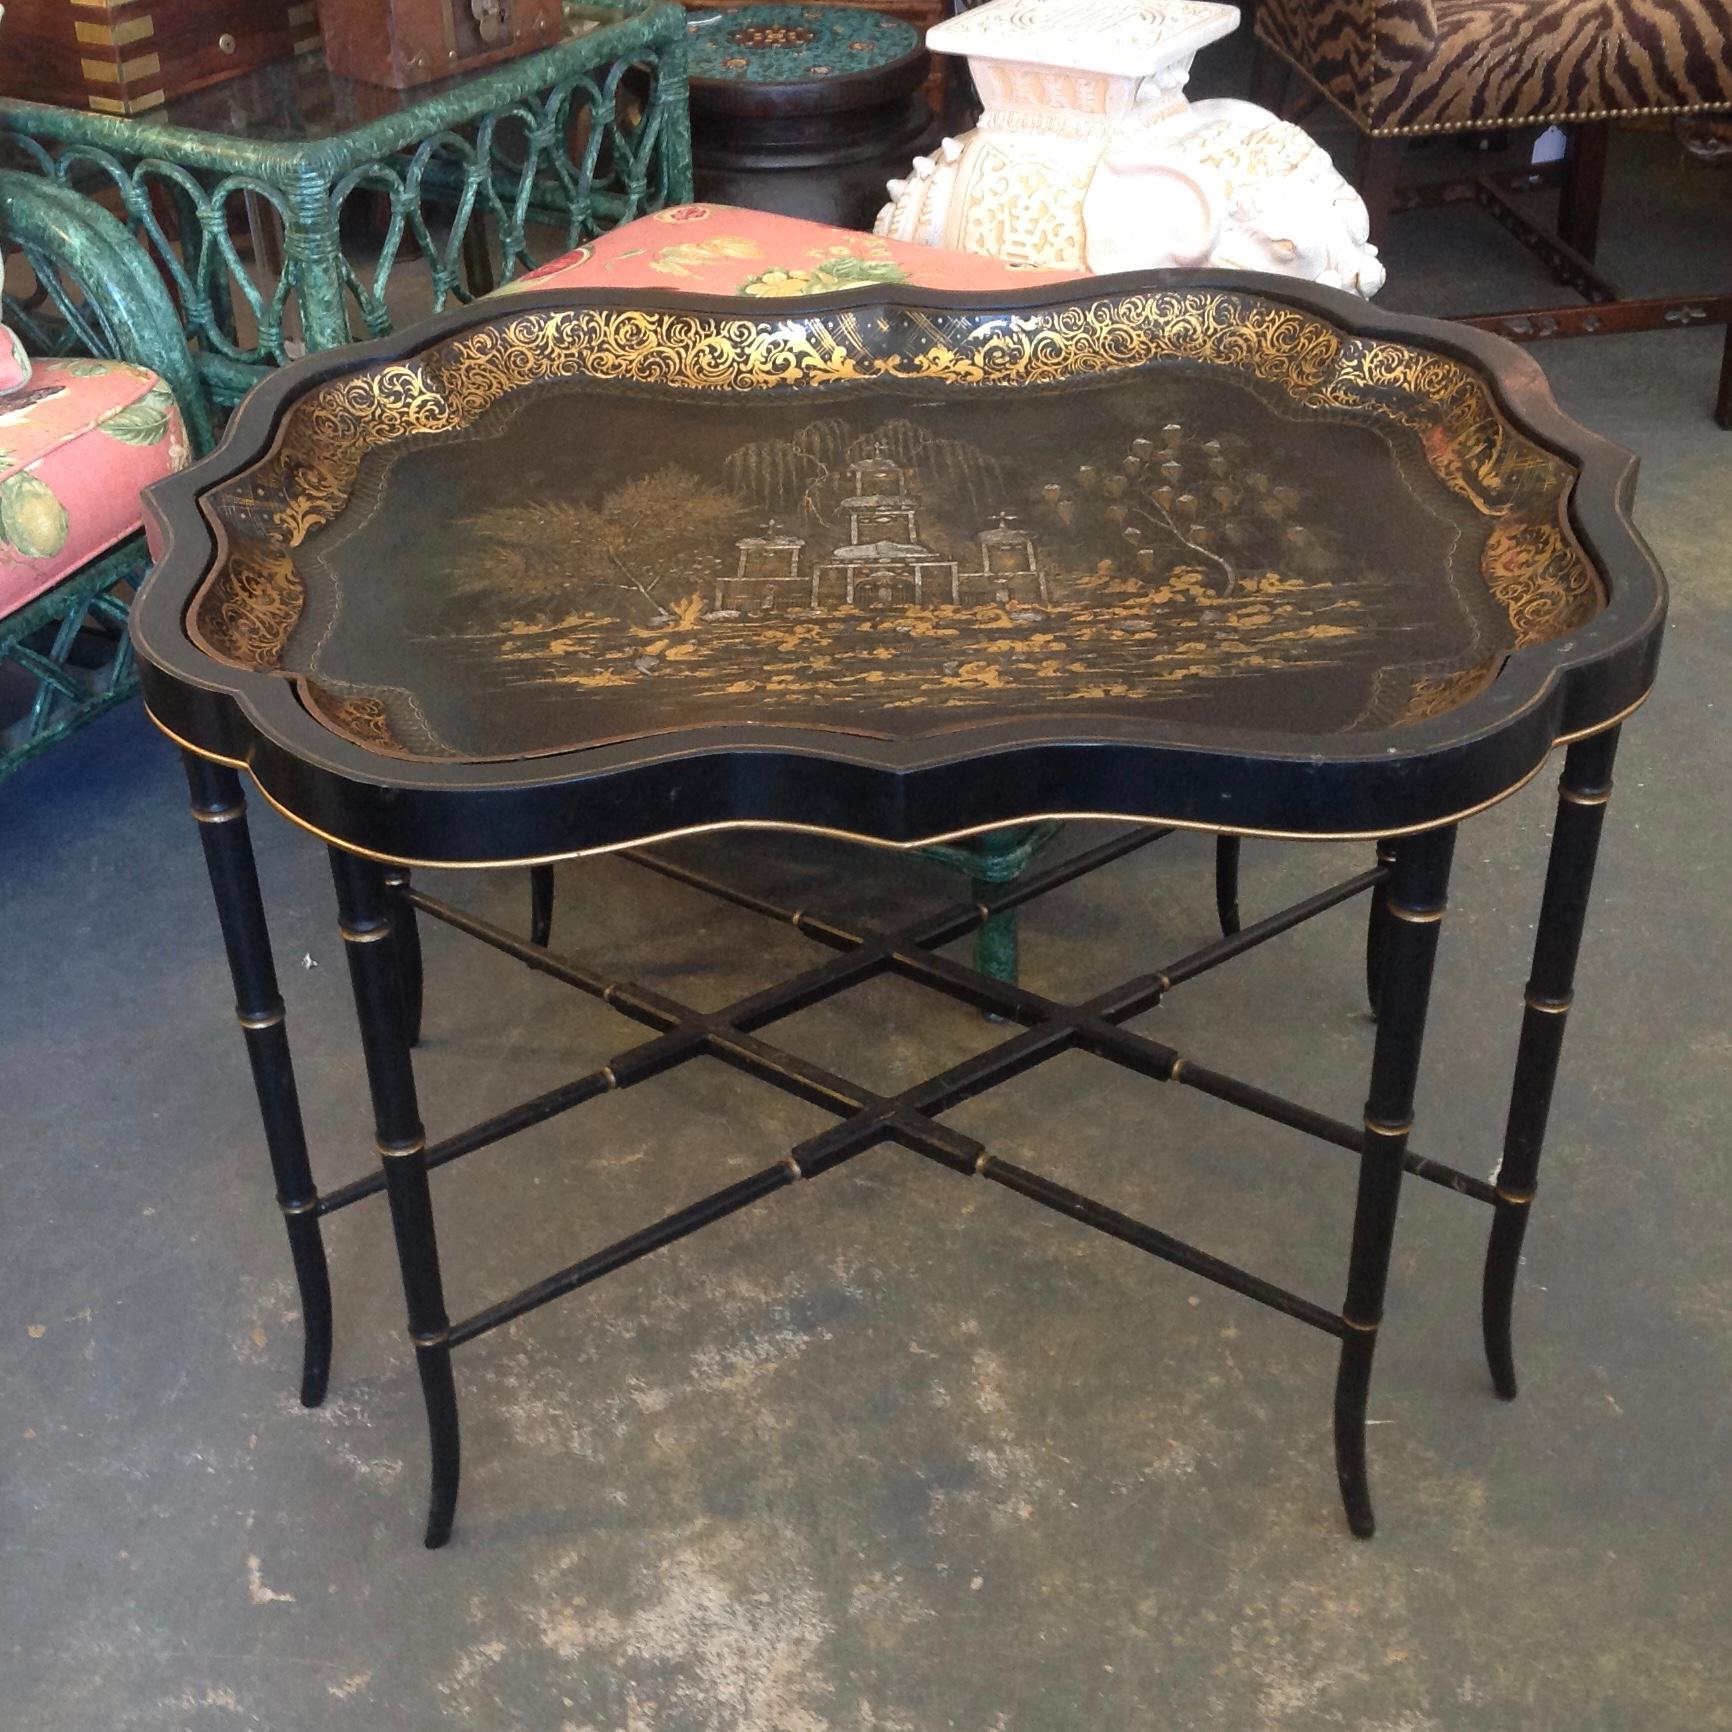 Regency 19th Century English Chinoiserie Abalone and Gilt Papier Mâché Tray on Stand